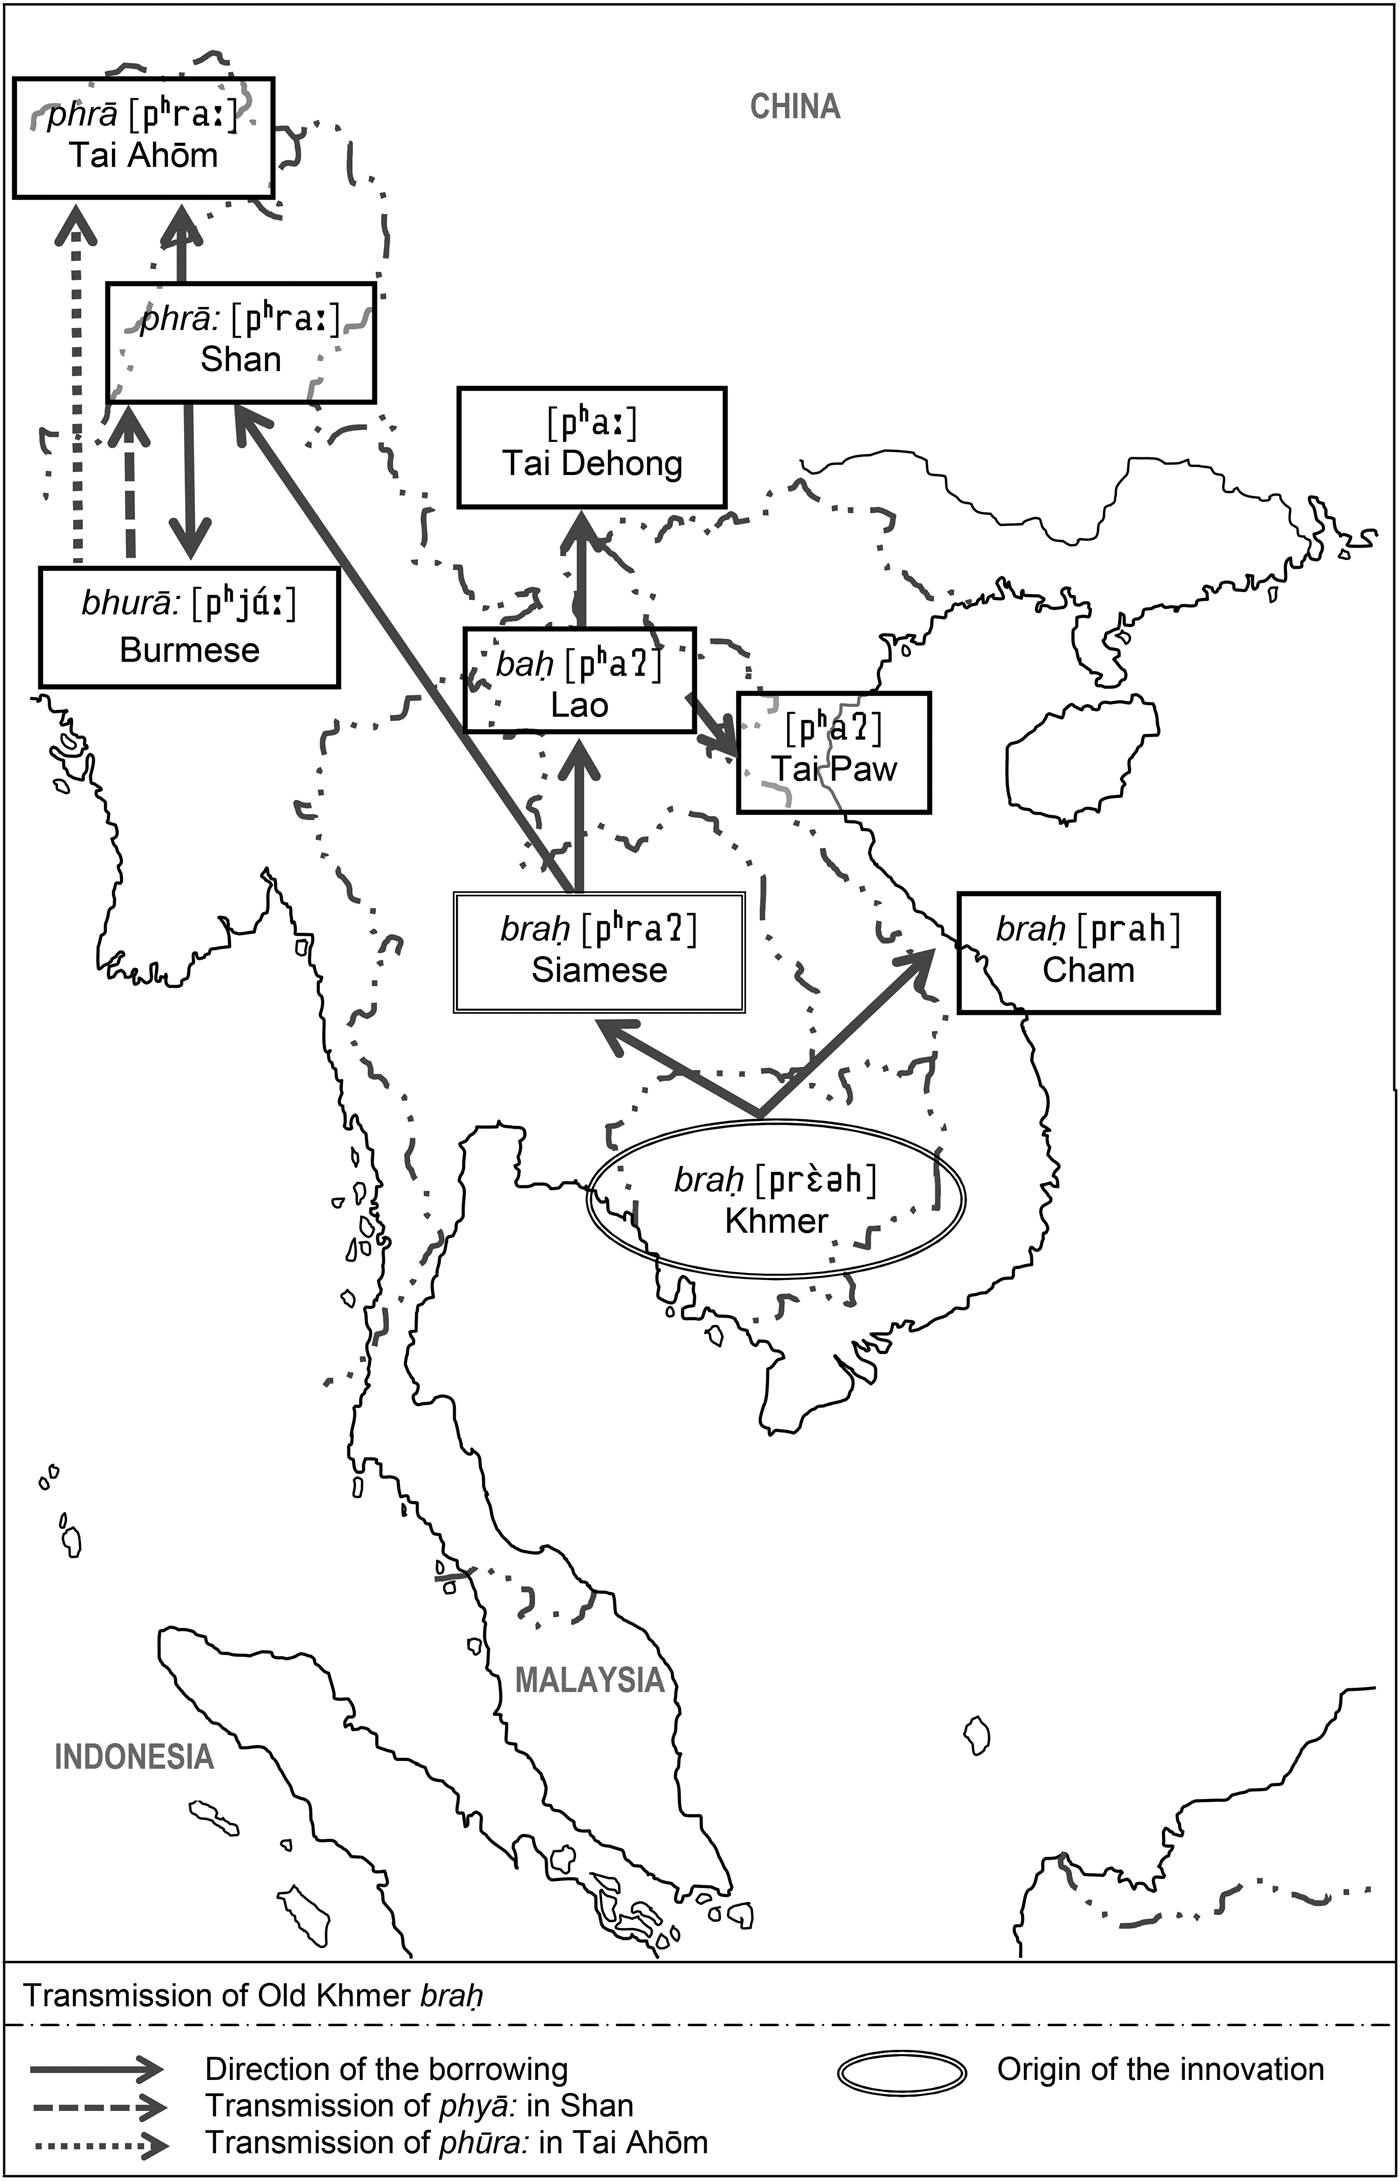 Brahmaṇa As An Honorific In Indianized Mainland Southeast Asia A Linguistic Approach Bulletin Of The School Of Oriental And African Studies Cambridge Core